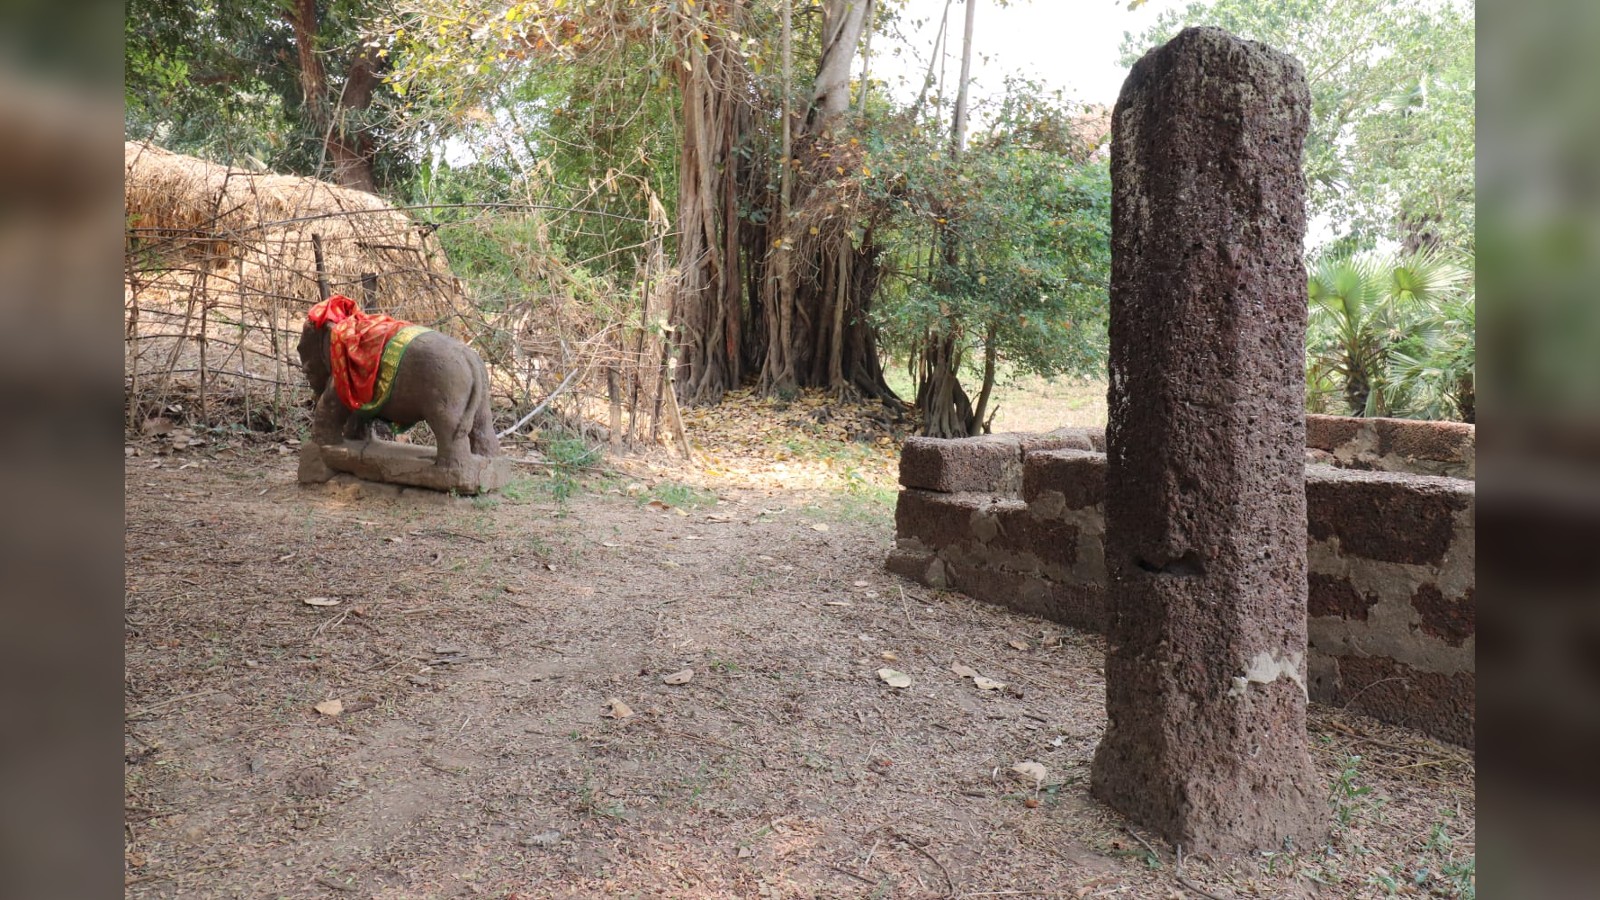 A reddish pillar is in the foreground with the elephant (partially covered with a red cloth) in the background in the field.